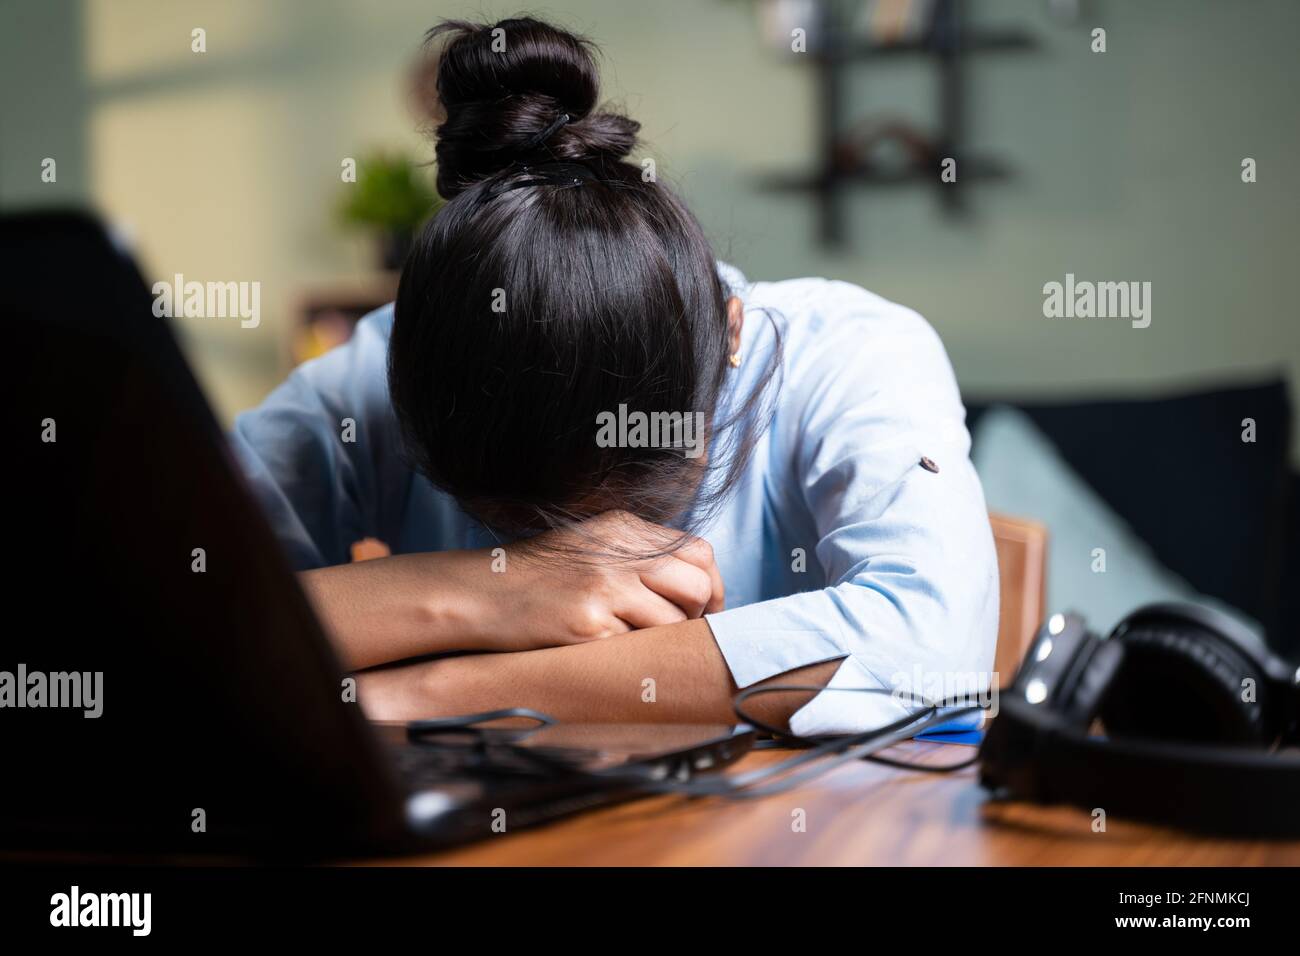 young Business woman sleeping by closing laptop while working, concept of new normal burnout, over or late night work at home during coronavirus covid Stock Photo